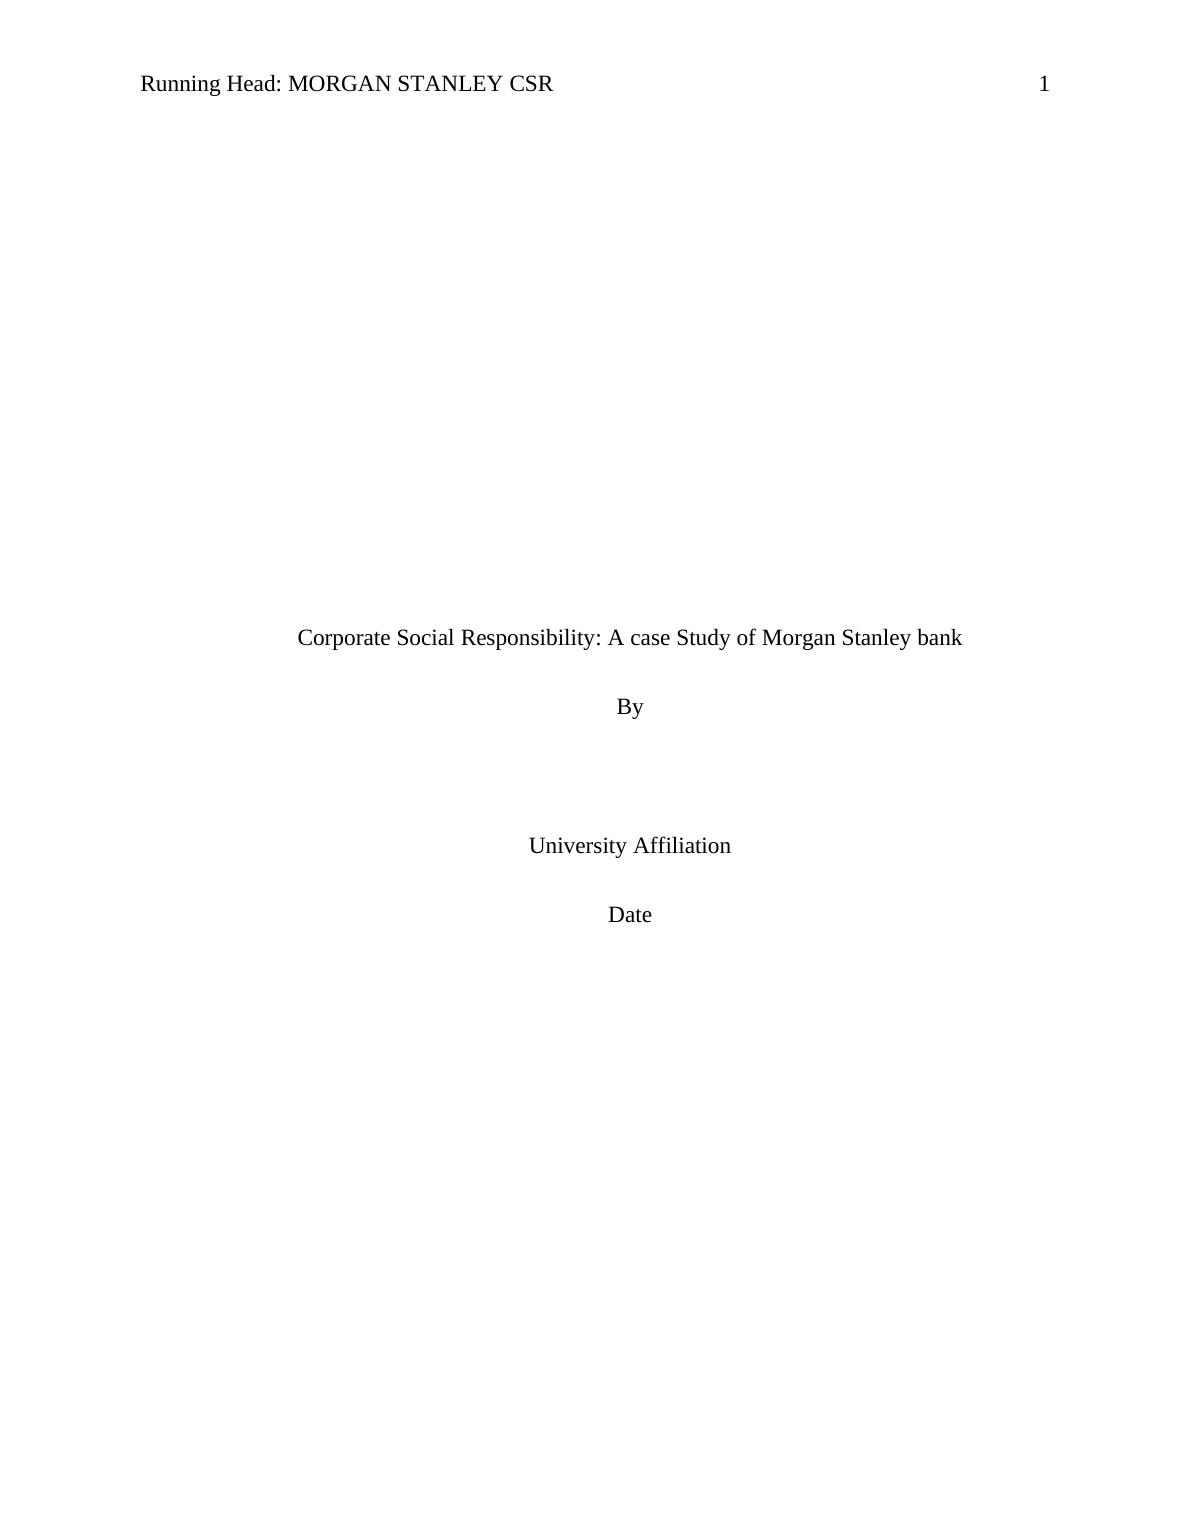 Corporate Social Responsibility: A Case Study of Morgan Stanley Bank_1